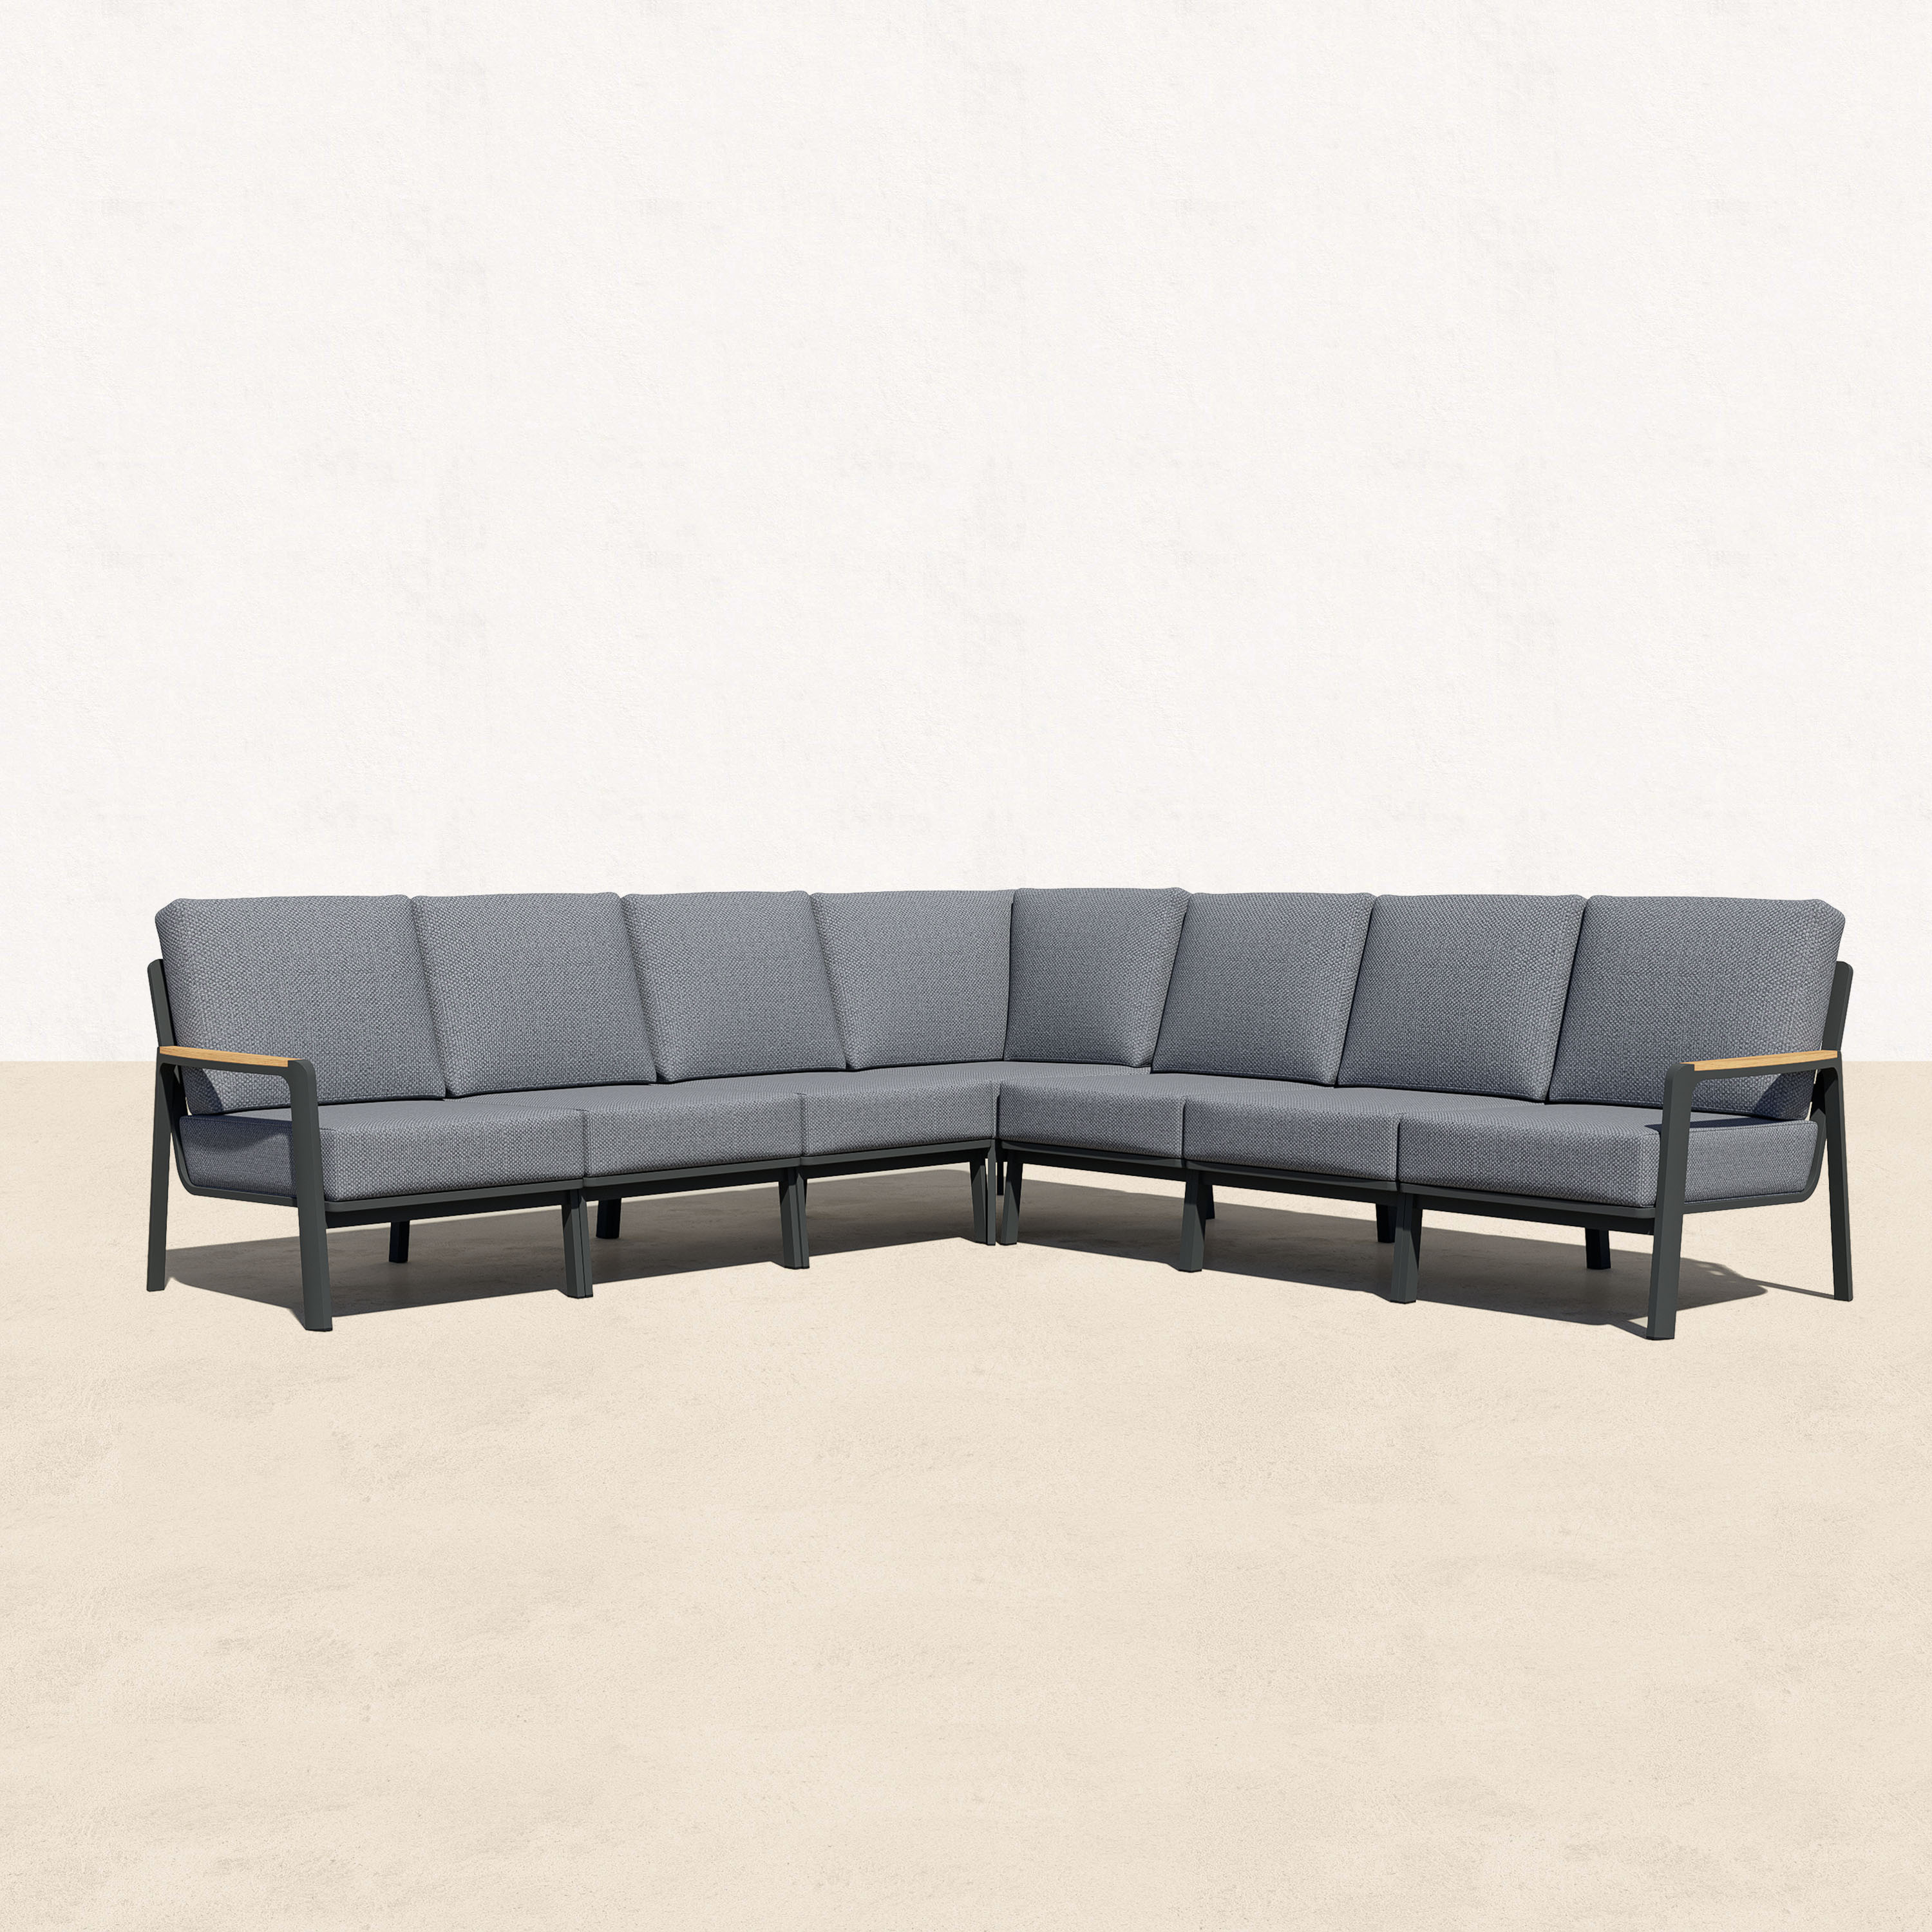 Orion Teak Outdoor L Sectional - 7 Seat